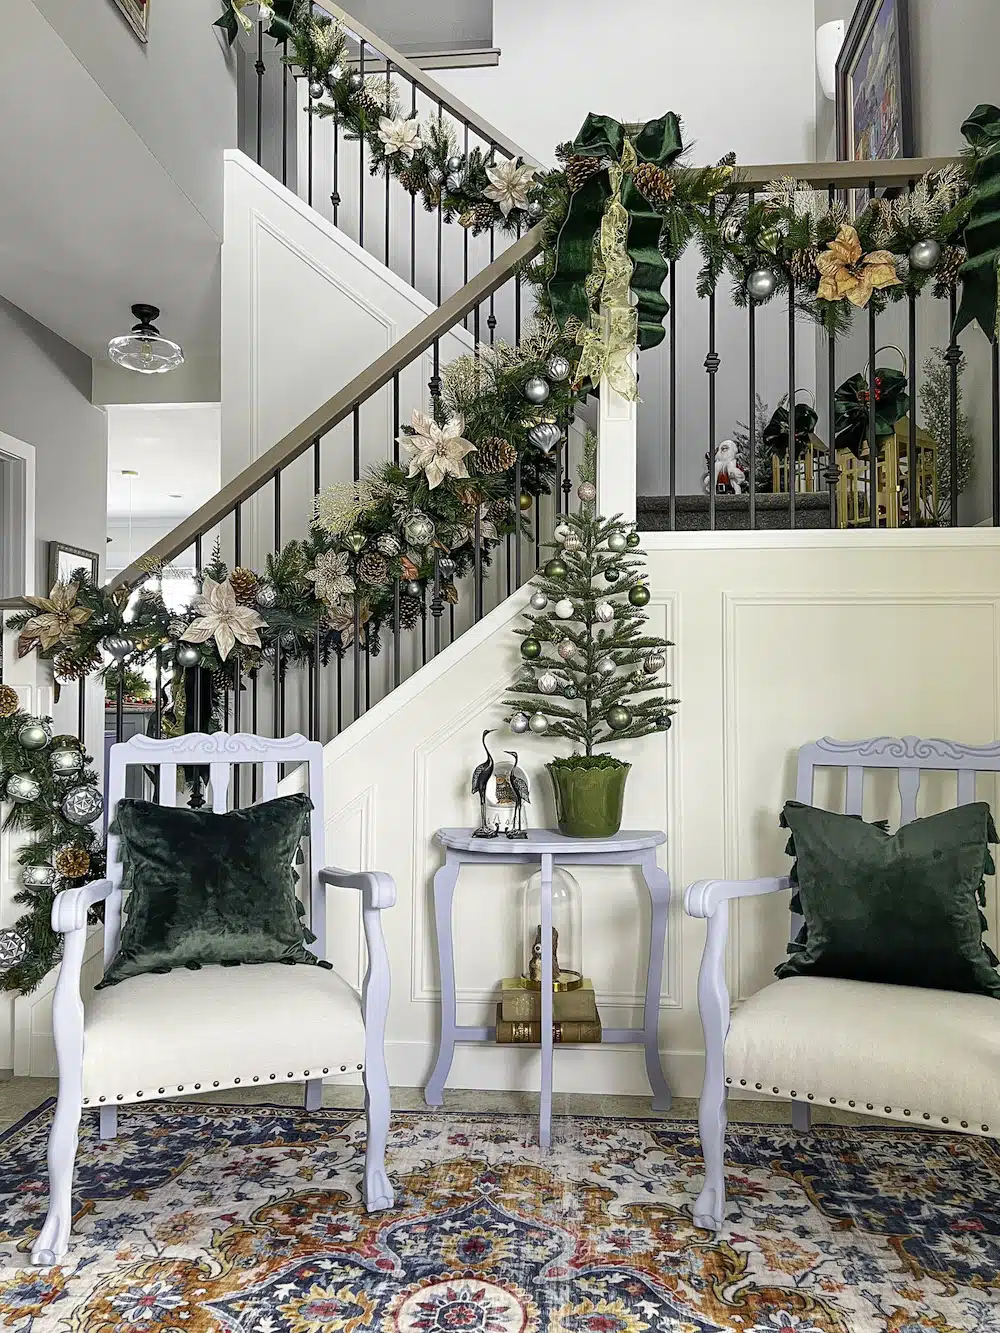 Entryway and stairs decorated for Christmas